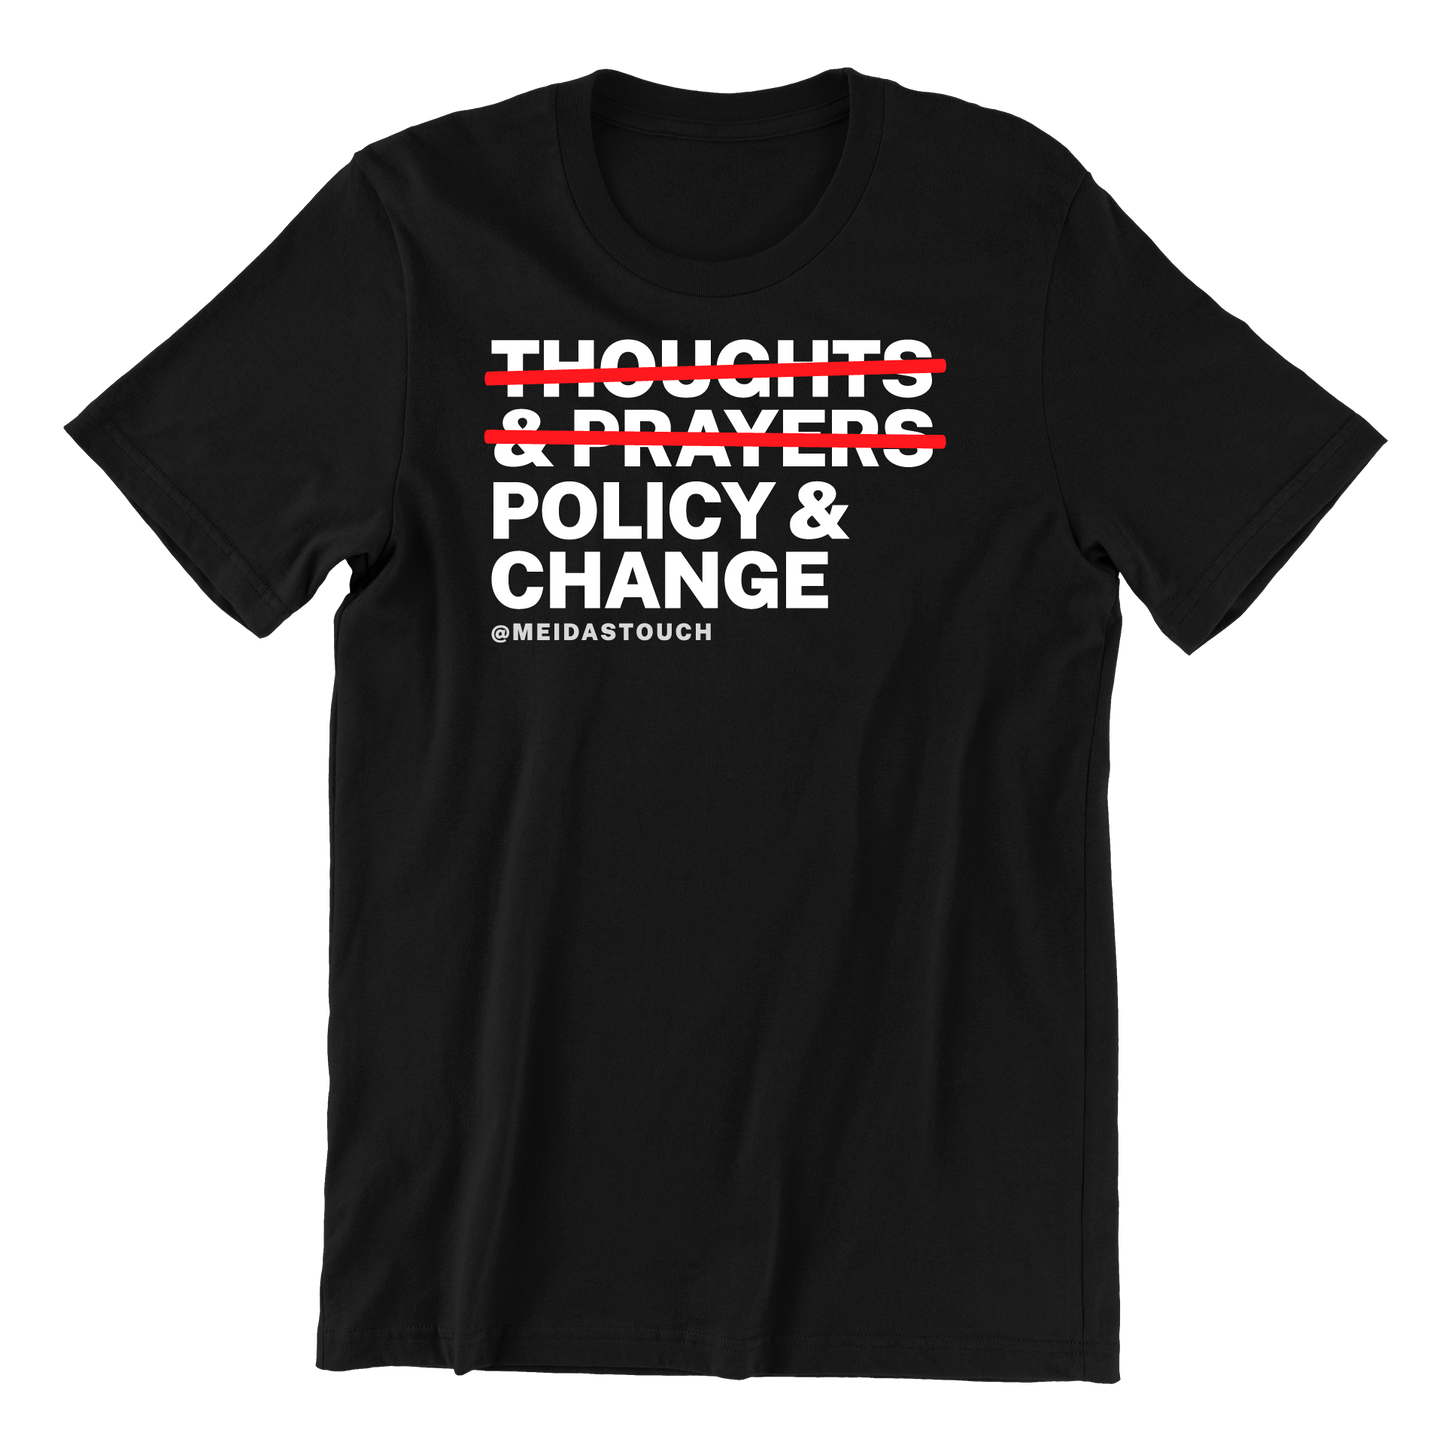 Policy and Change Tee